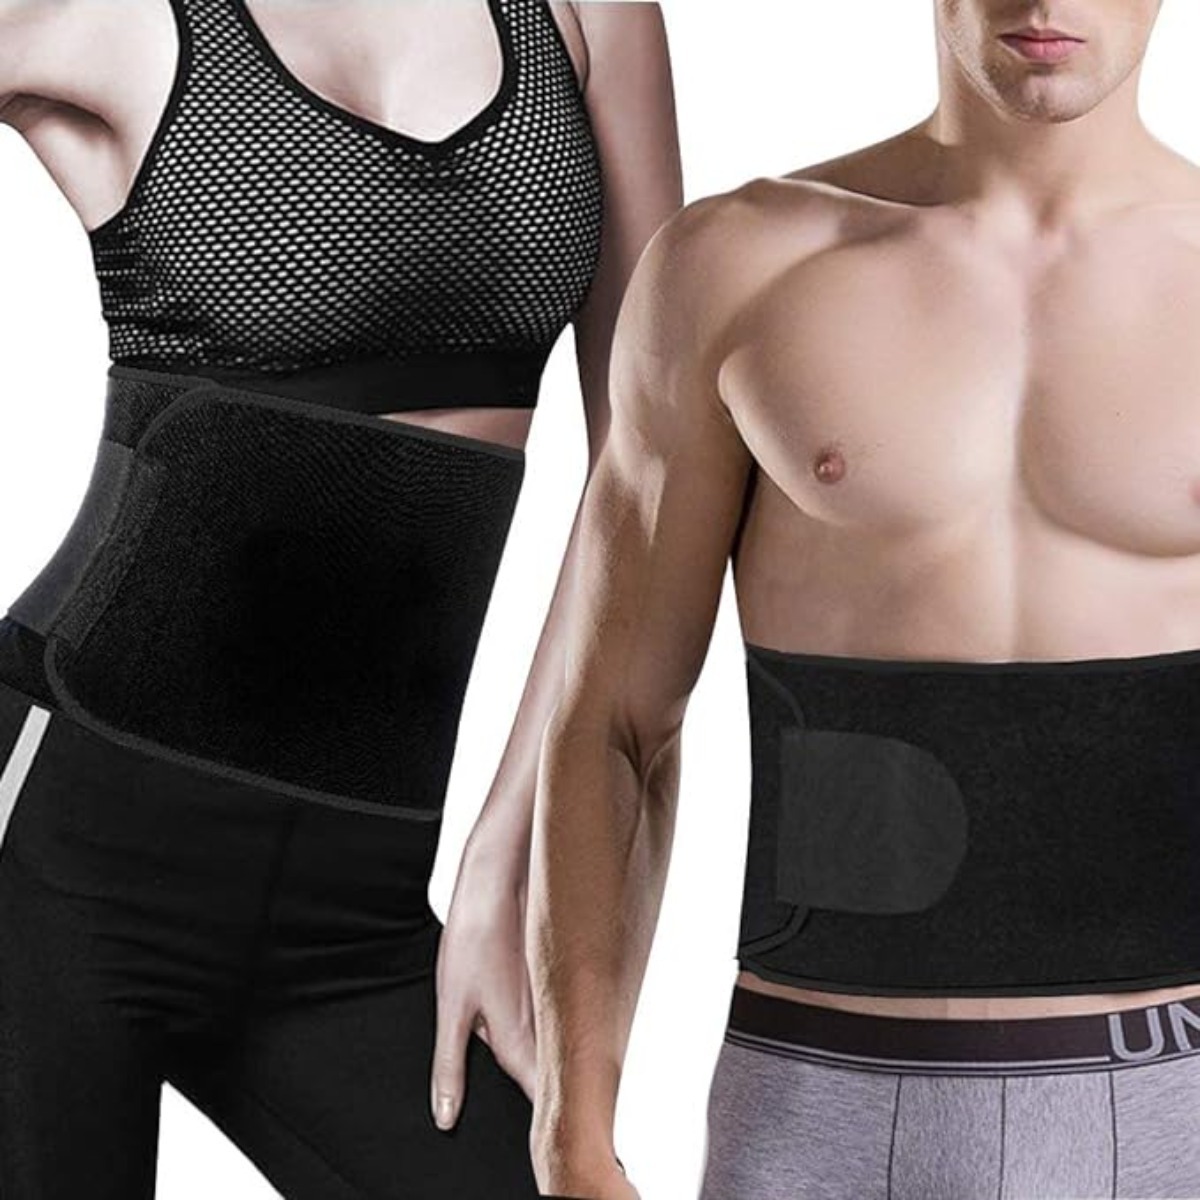 Slimming belt. hot shaper. running belt Woman & men Waist Slimming Girdle –  Stomach Wrap Band for Sauna or Gym Sessions – Weight Loss, Increased Sweat  and Tummy Fitness Trimmer or a